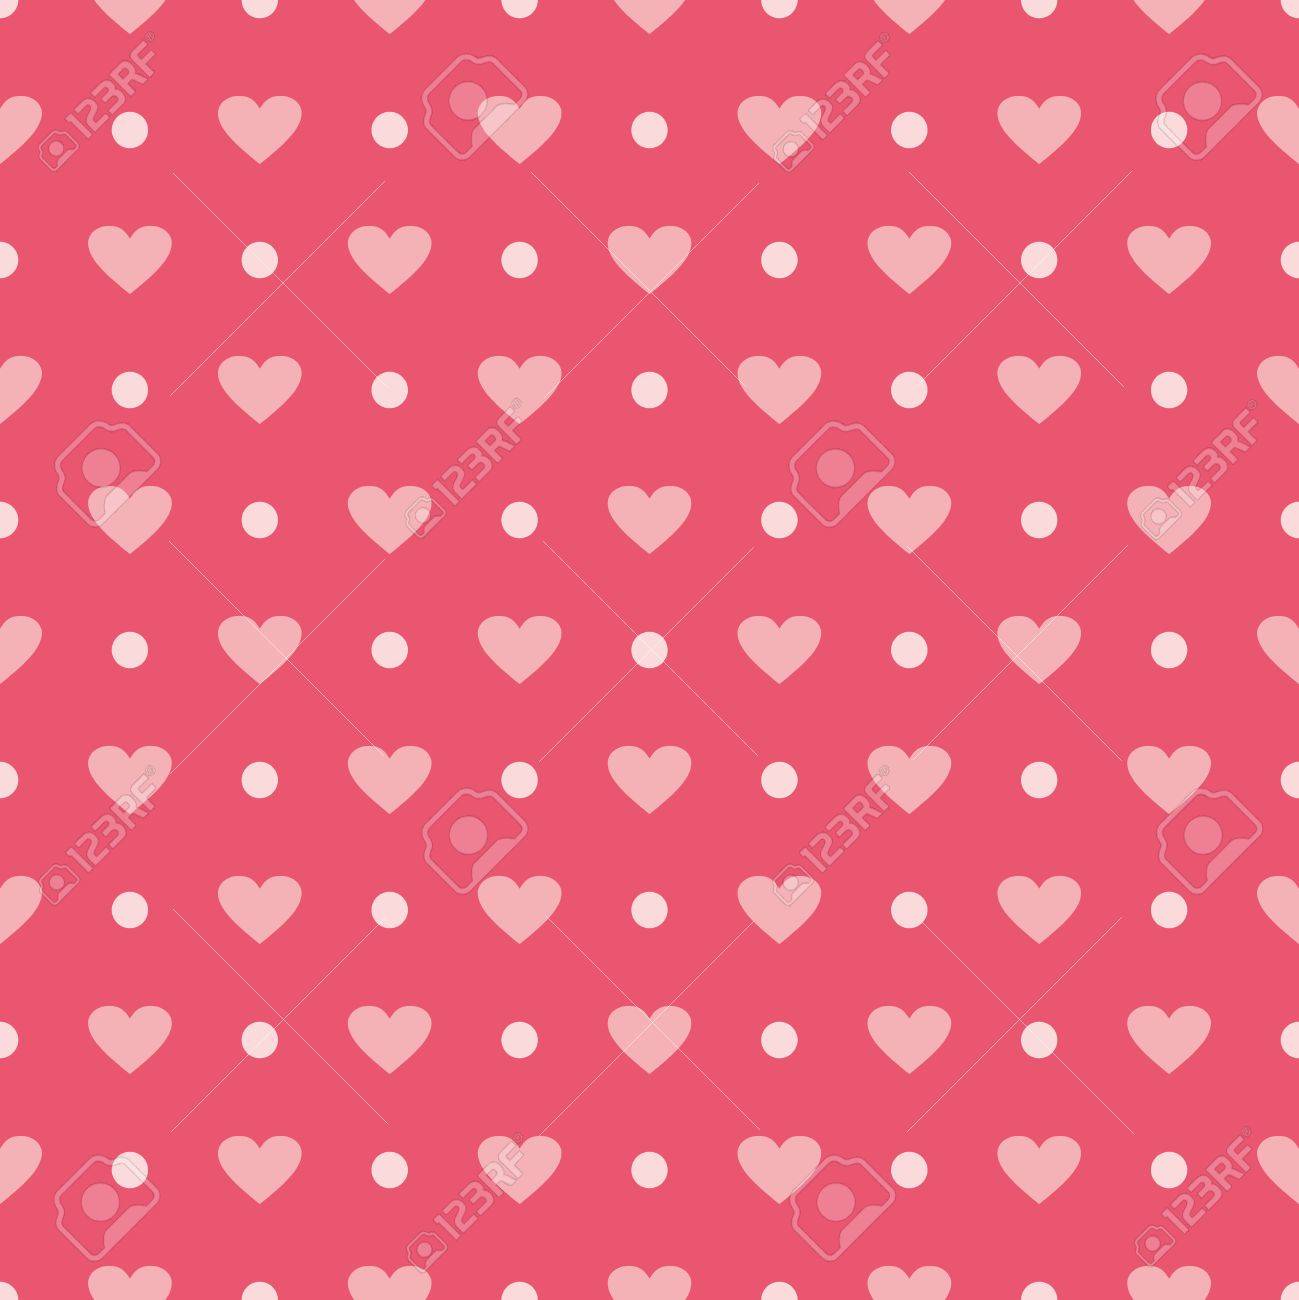 Pink Vector Tile Background With Hearts And Polka Dots Cute